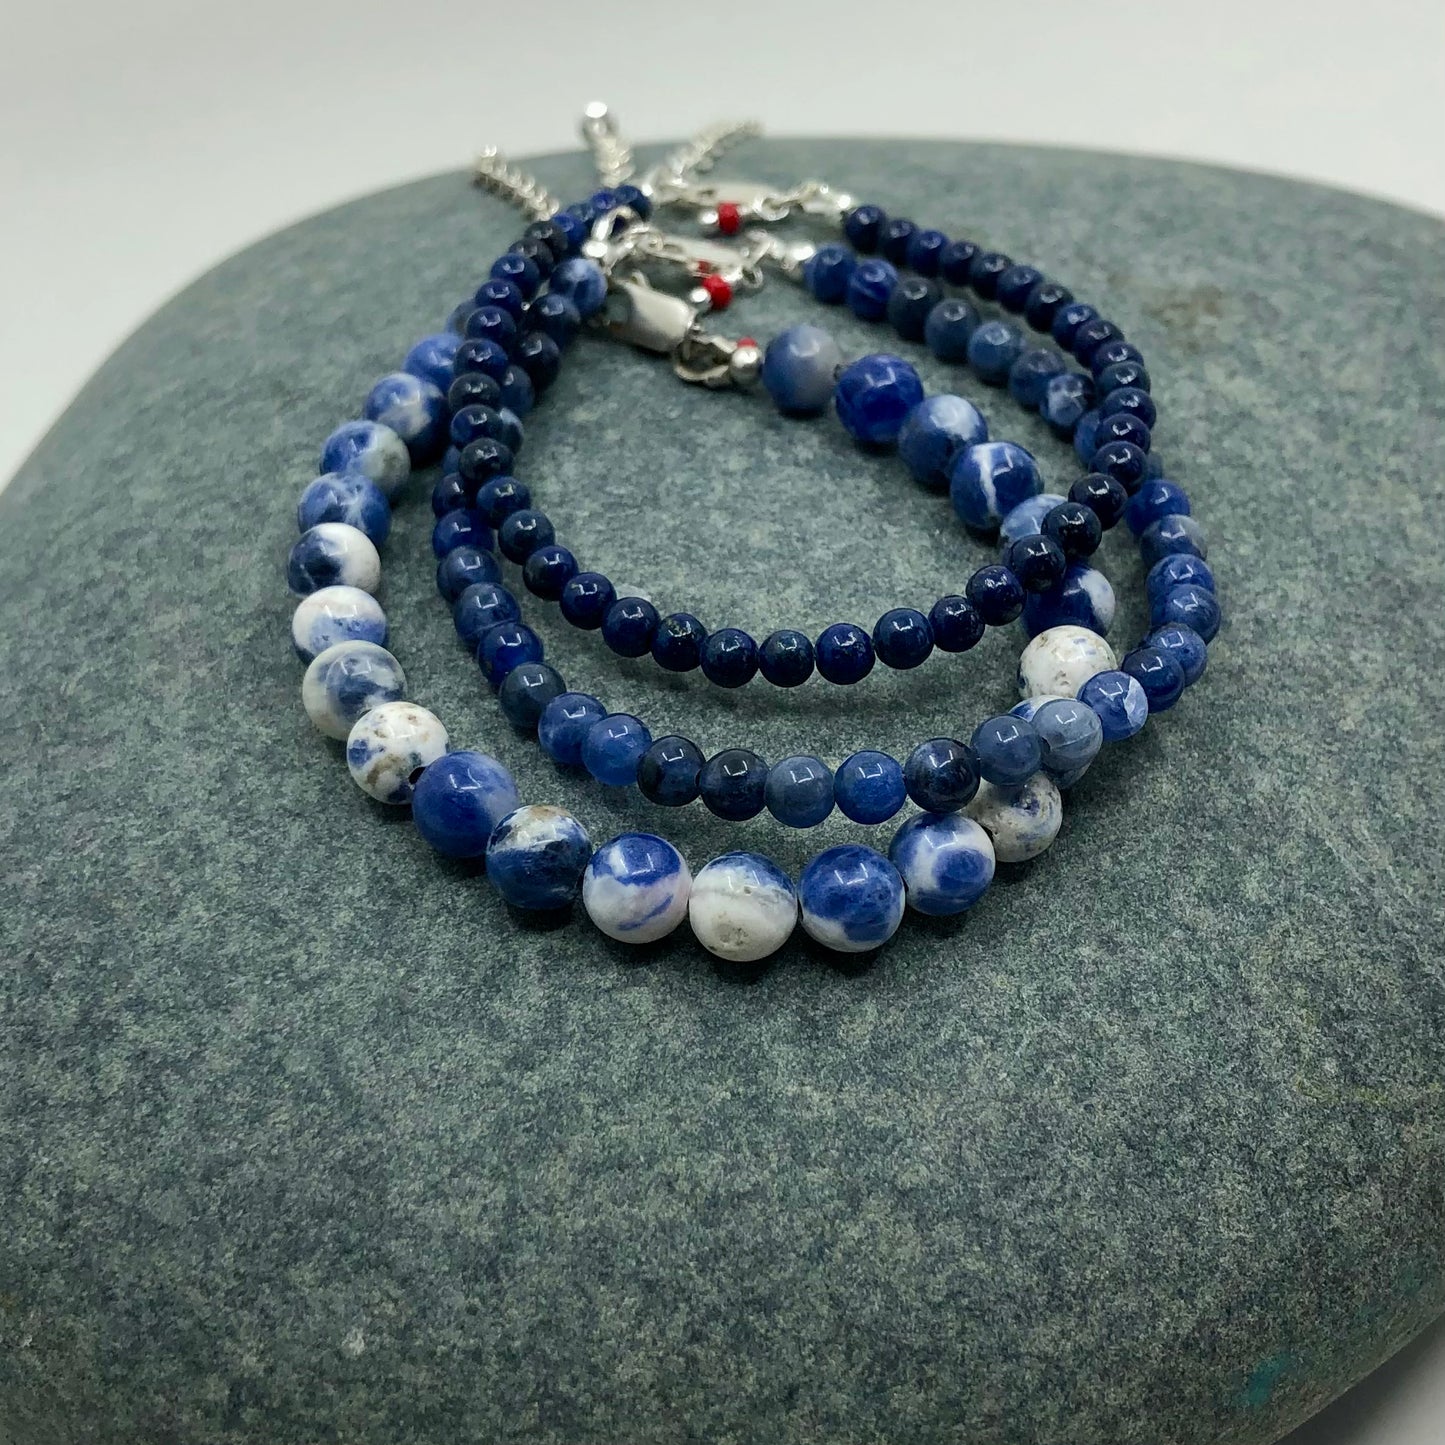 4mm Handcrafted Gemstone Beaded Bracelets with Sterling Silver Clasp